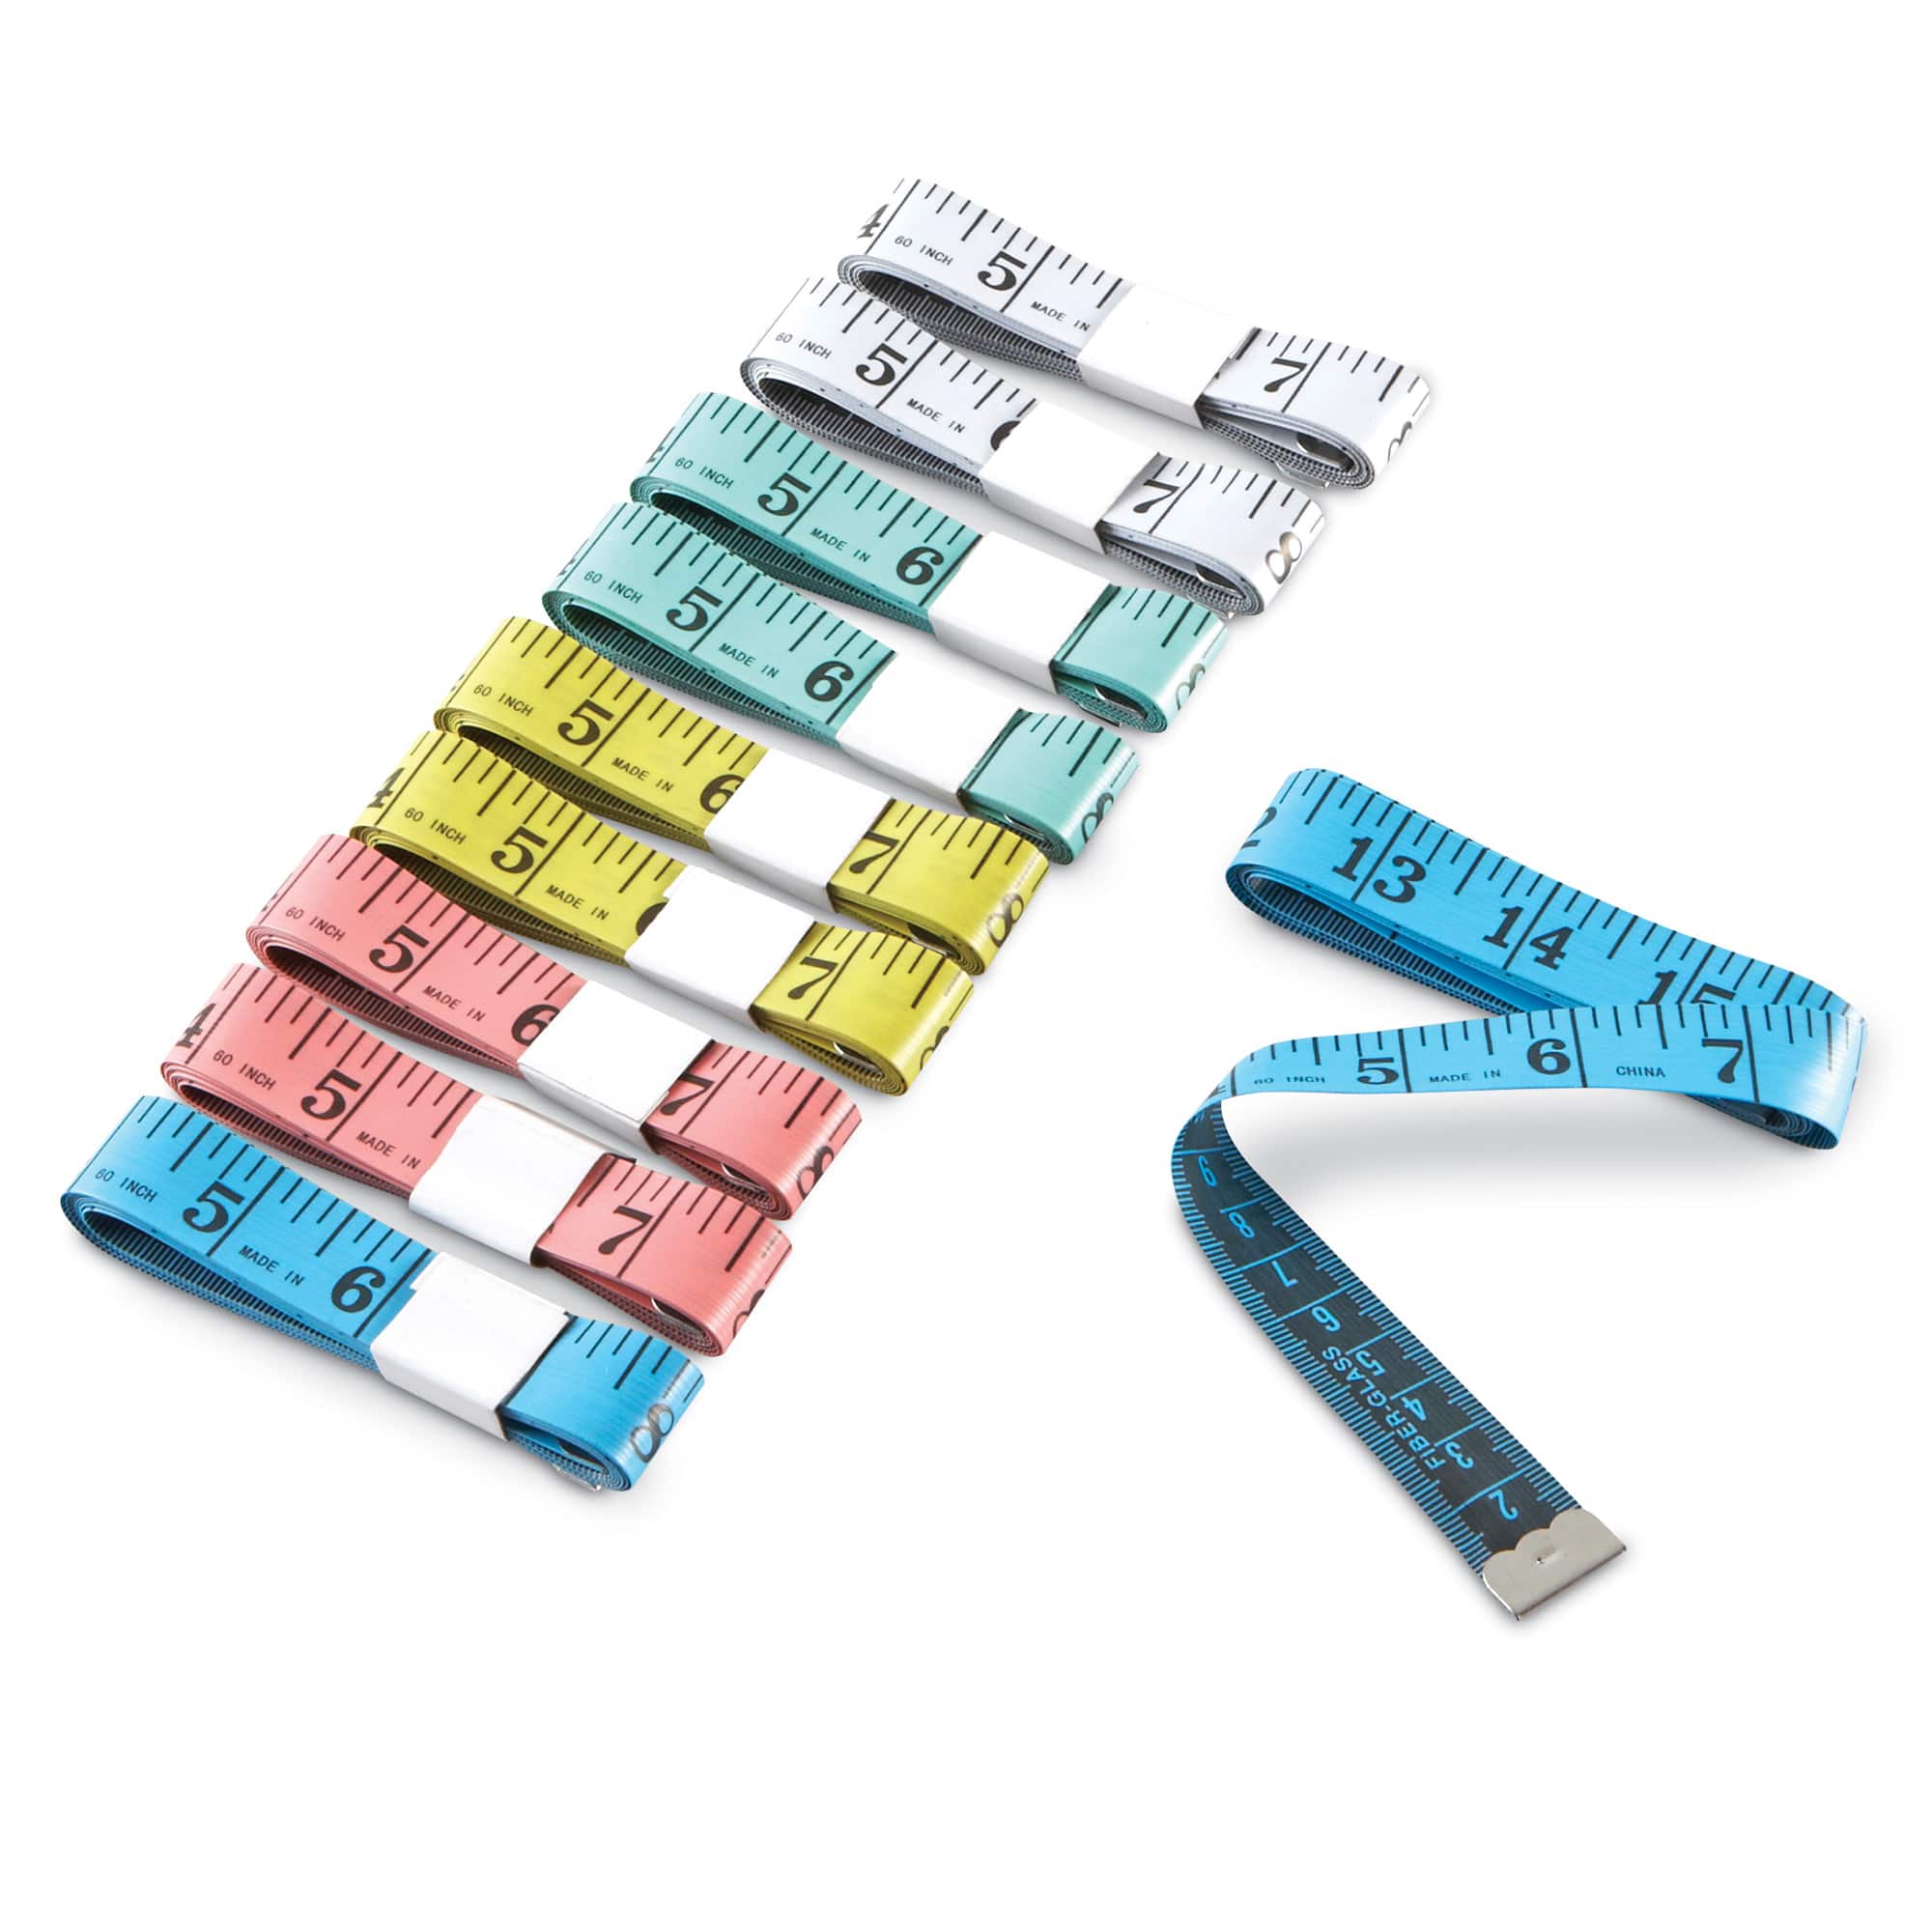 Tape Measure for Sewing, 60-Inch (Assorted colors)